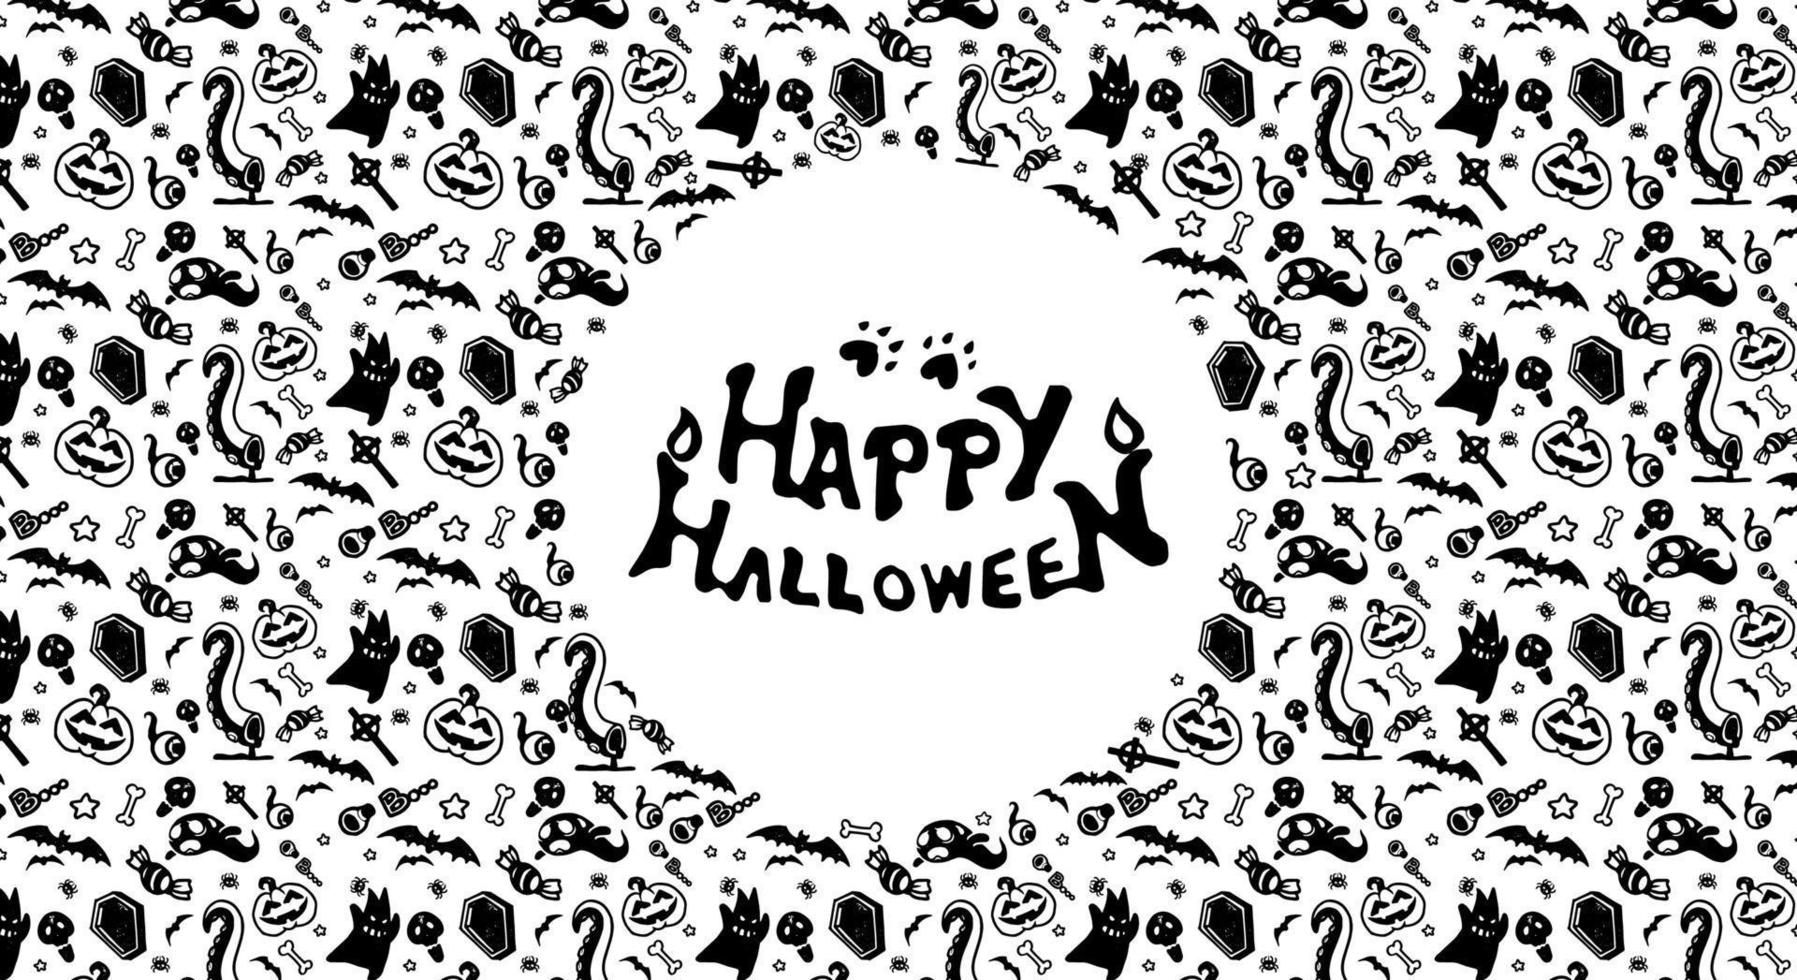 Halloween festive seamless pattern. Endless backgrounds with pumpkins, skulls, bats, spiders, ghosts, bones, candies, spider webs and many more. vector